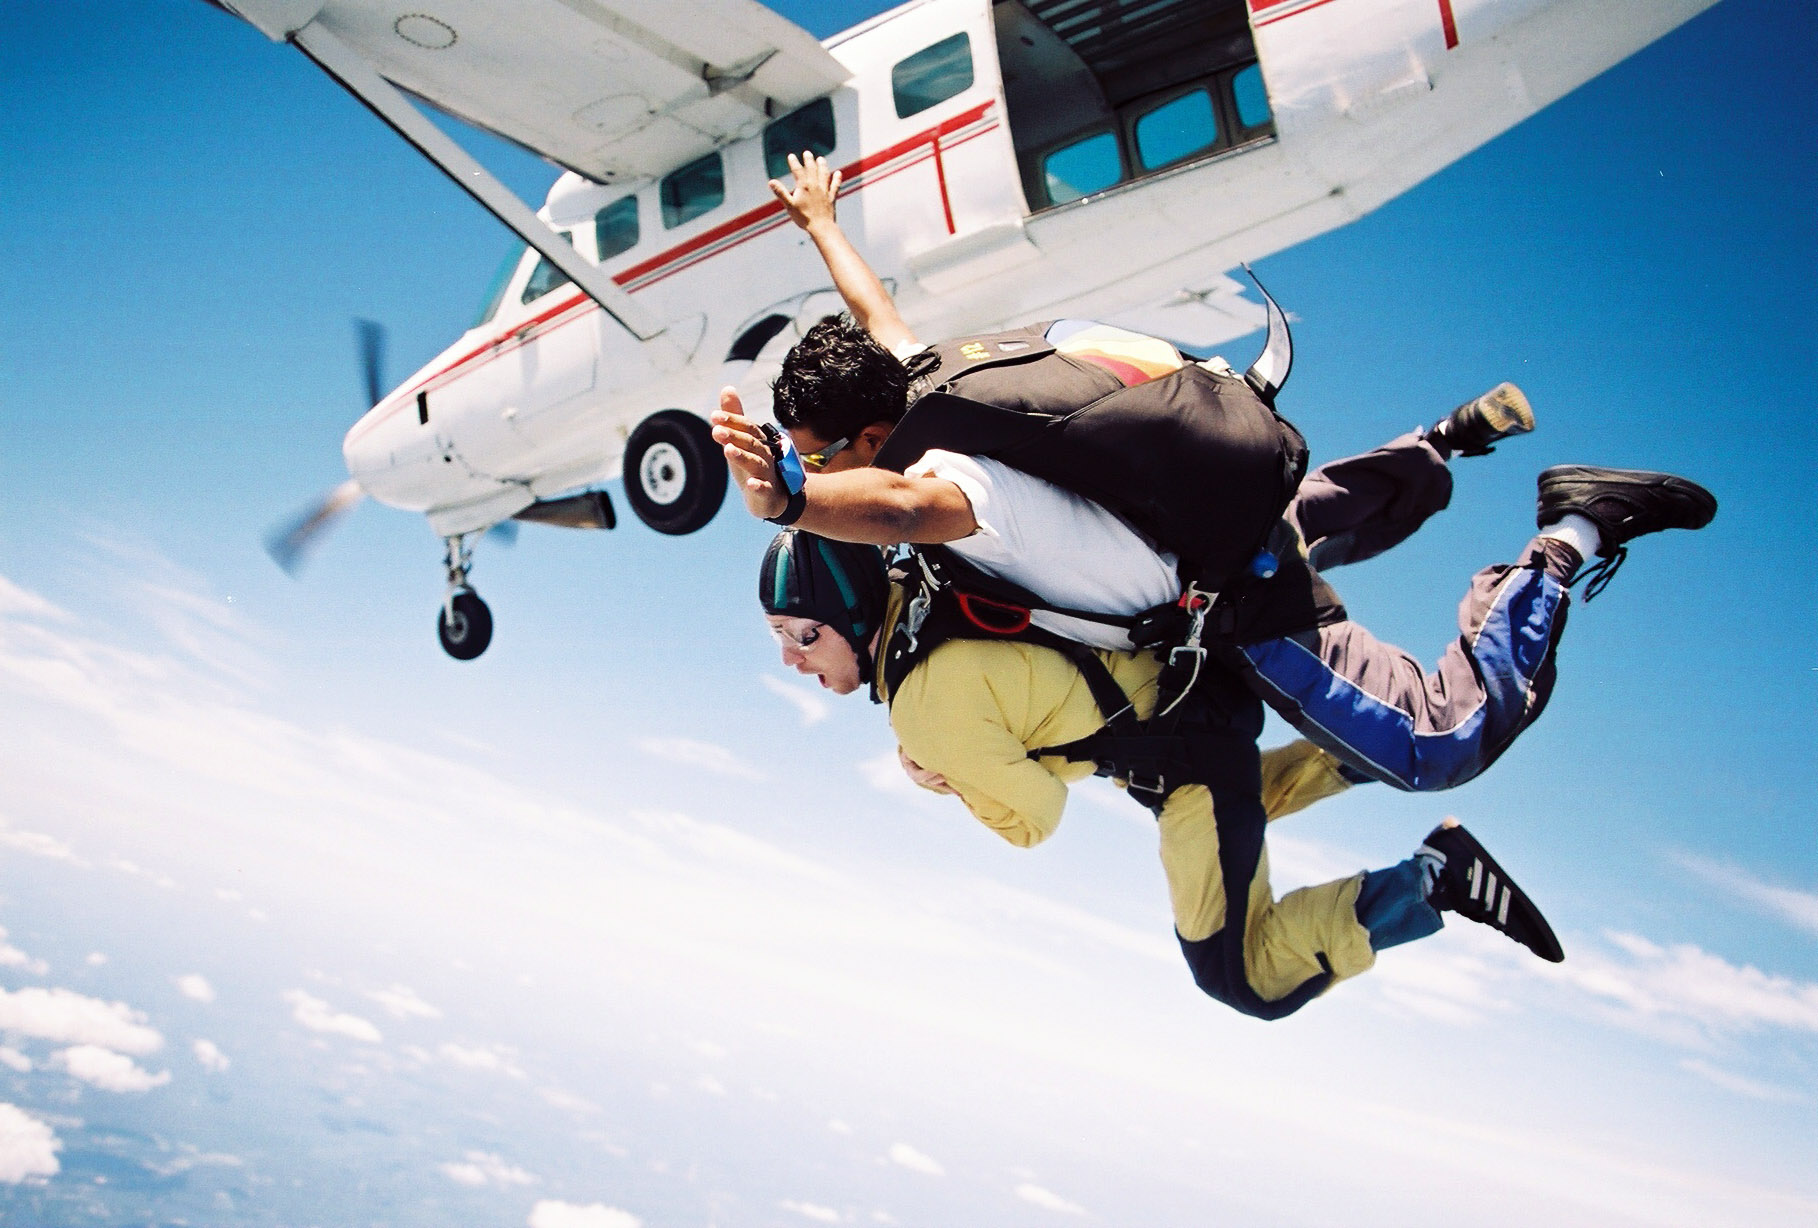 Skydiving Backgrounds, Compatible - PC, Mobile, Gadgets| 1818x1228 px